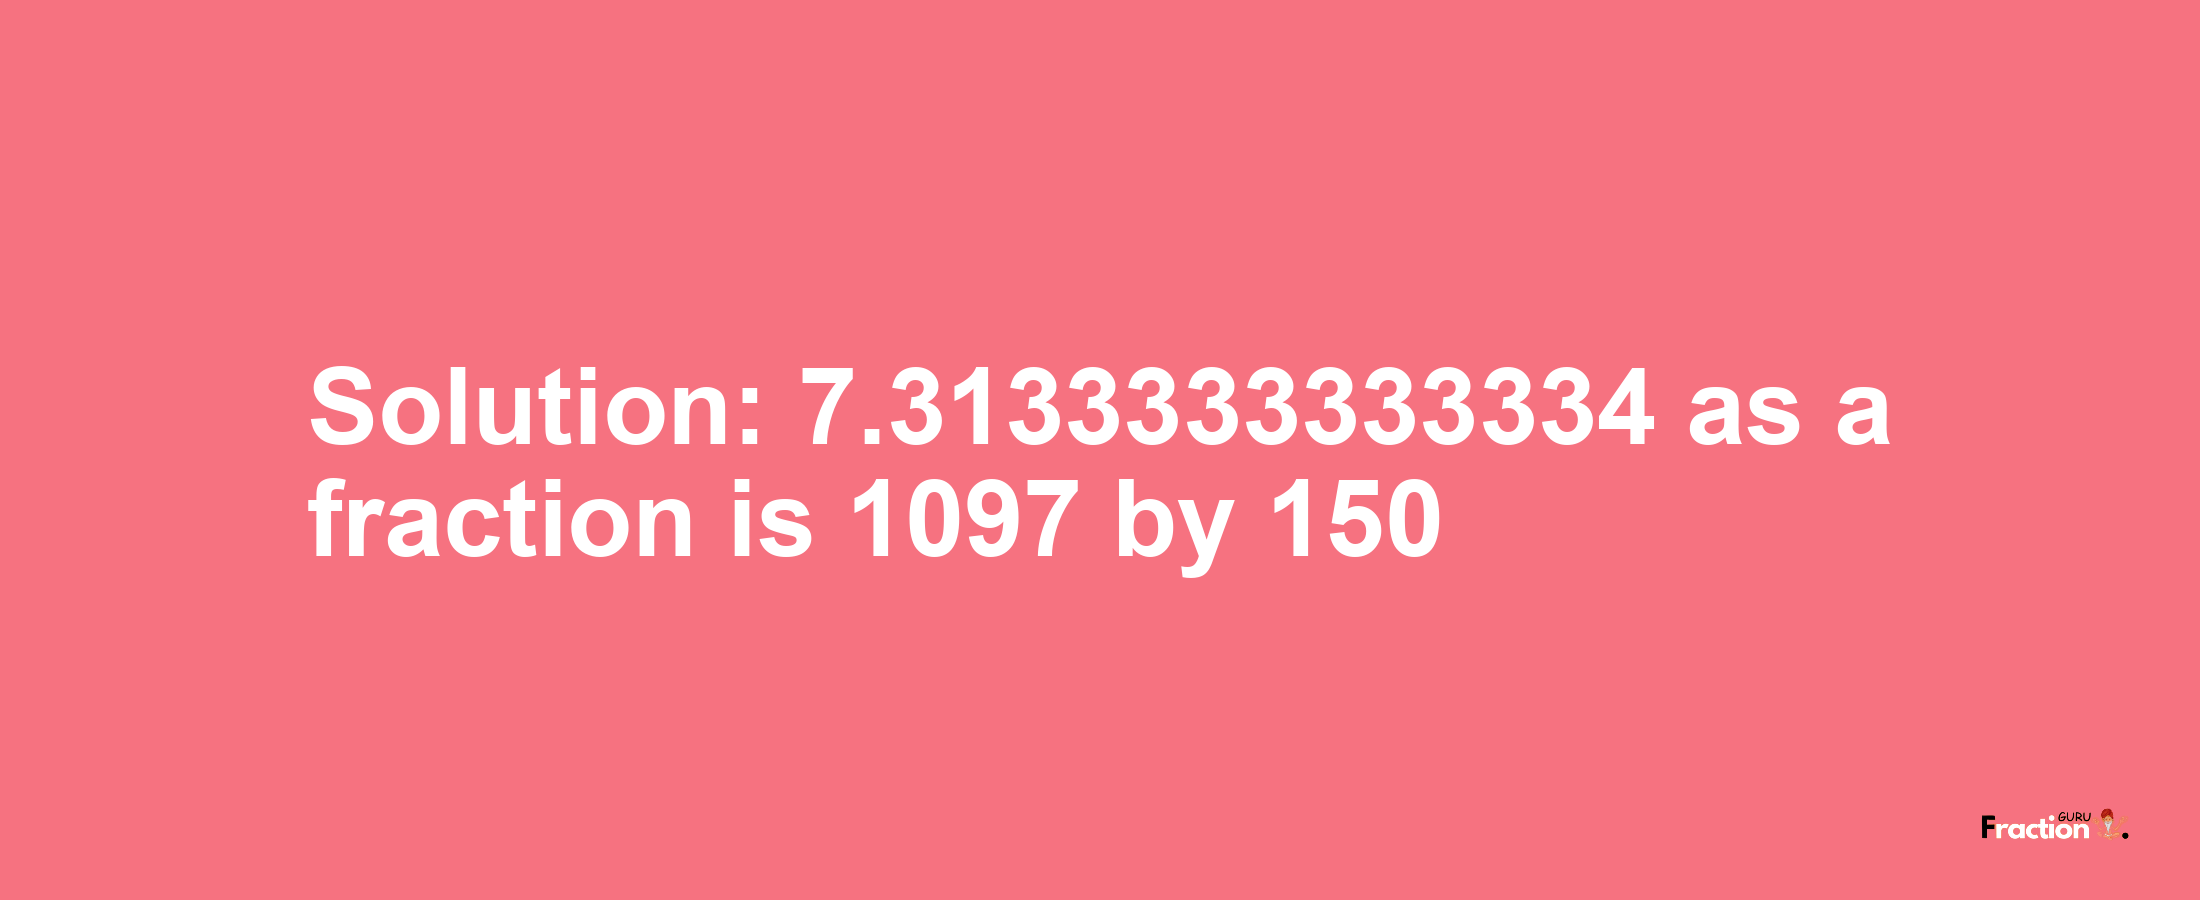 Solution:7.3133333333334 as a fraction is 1097/150